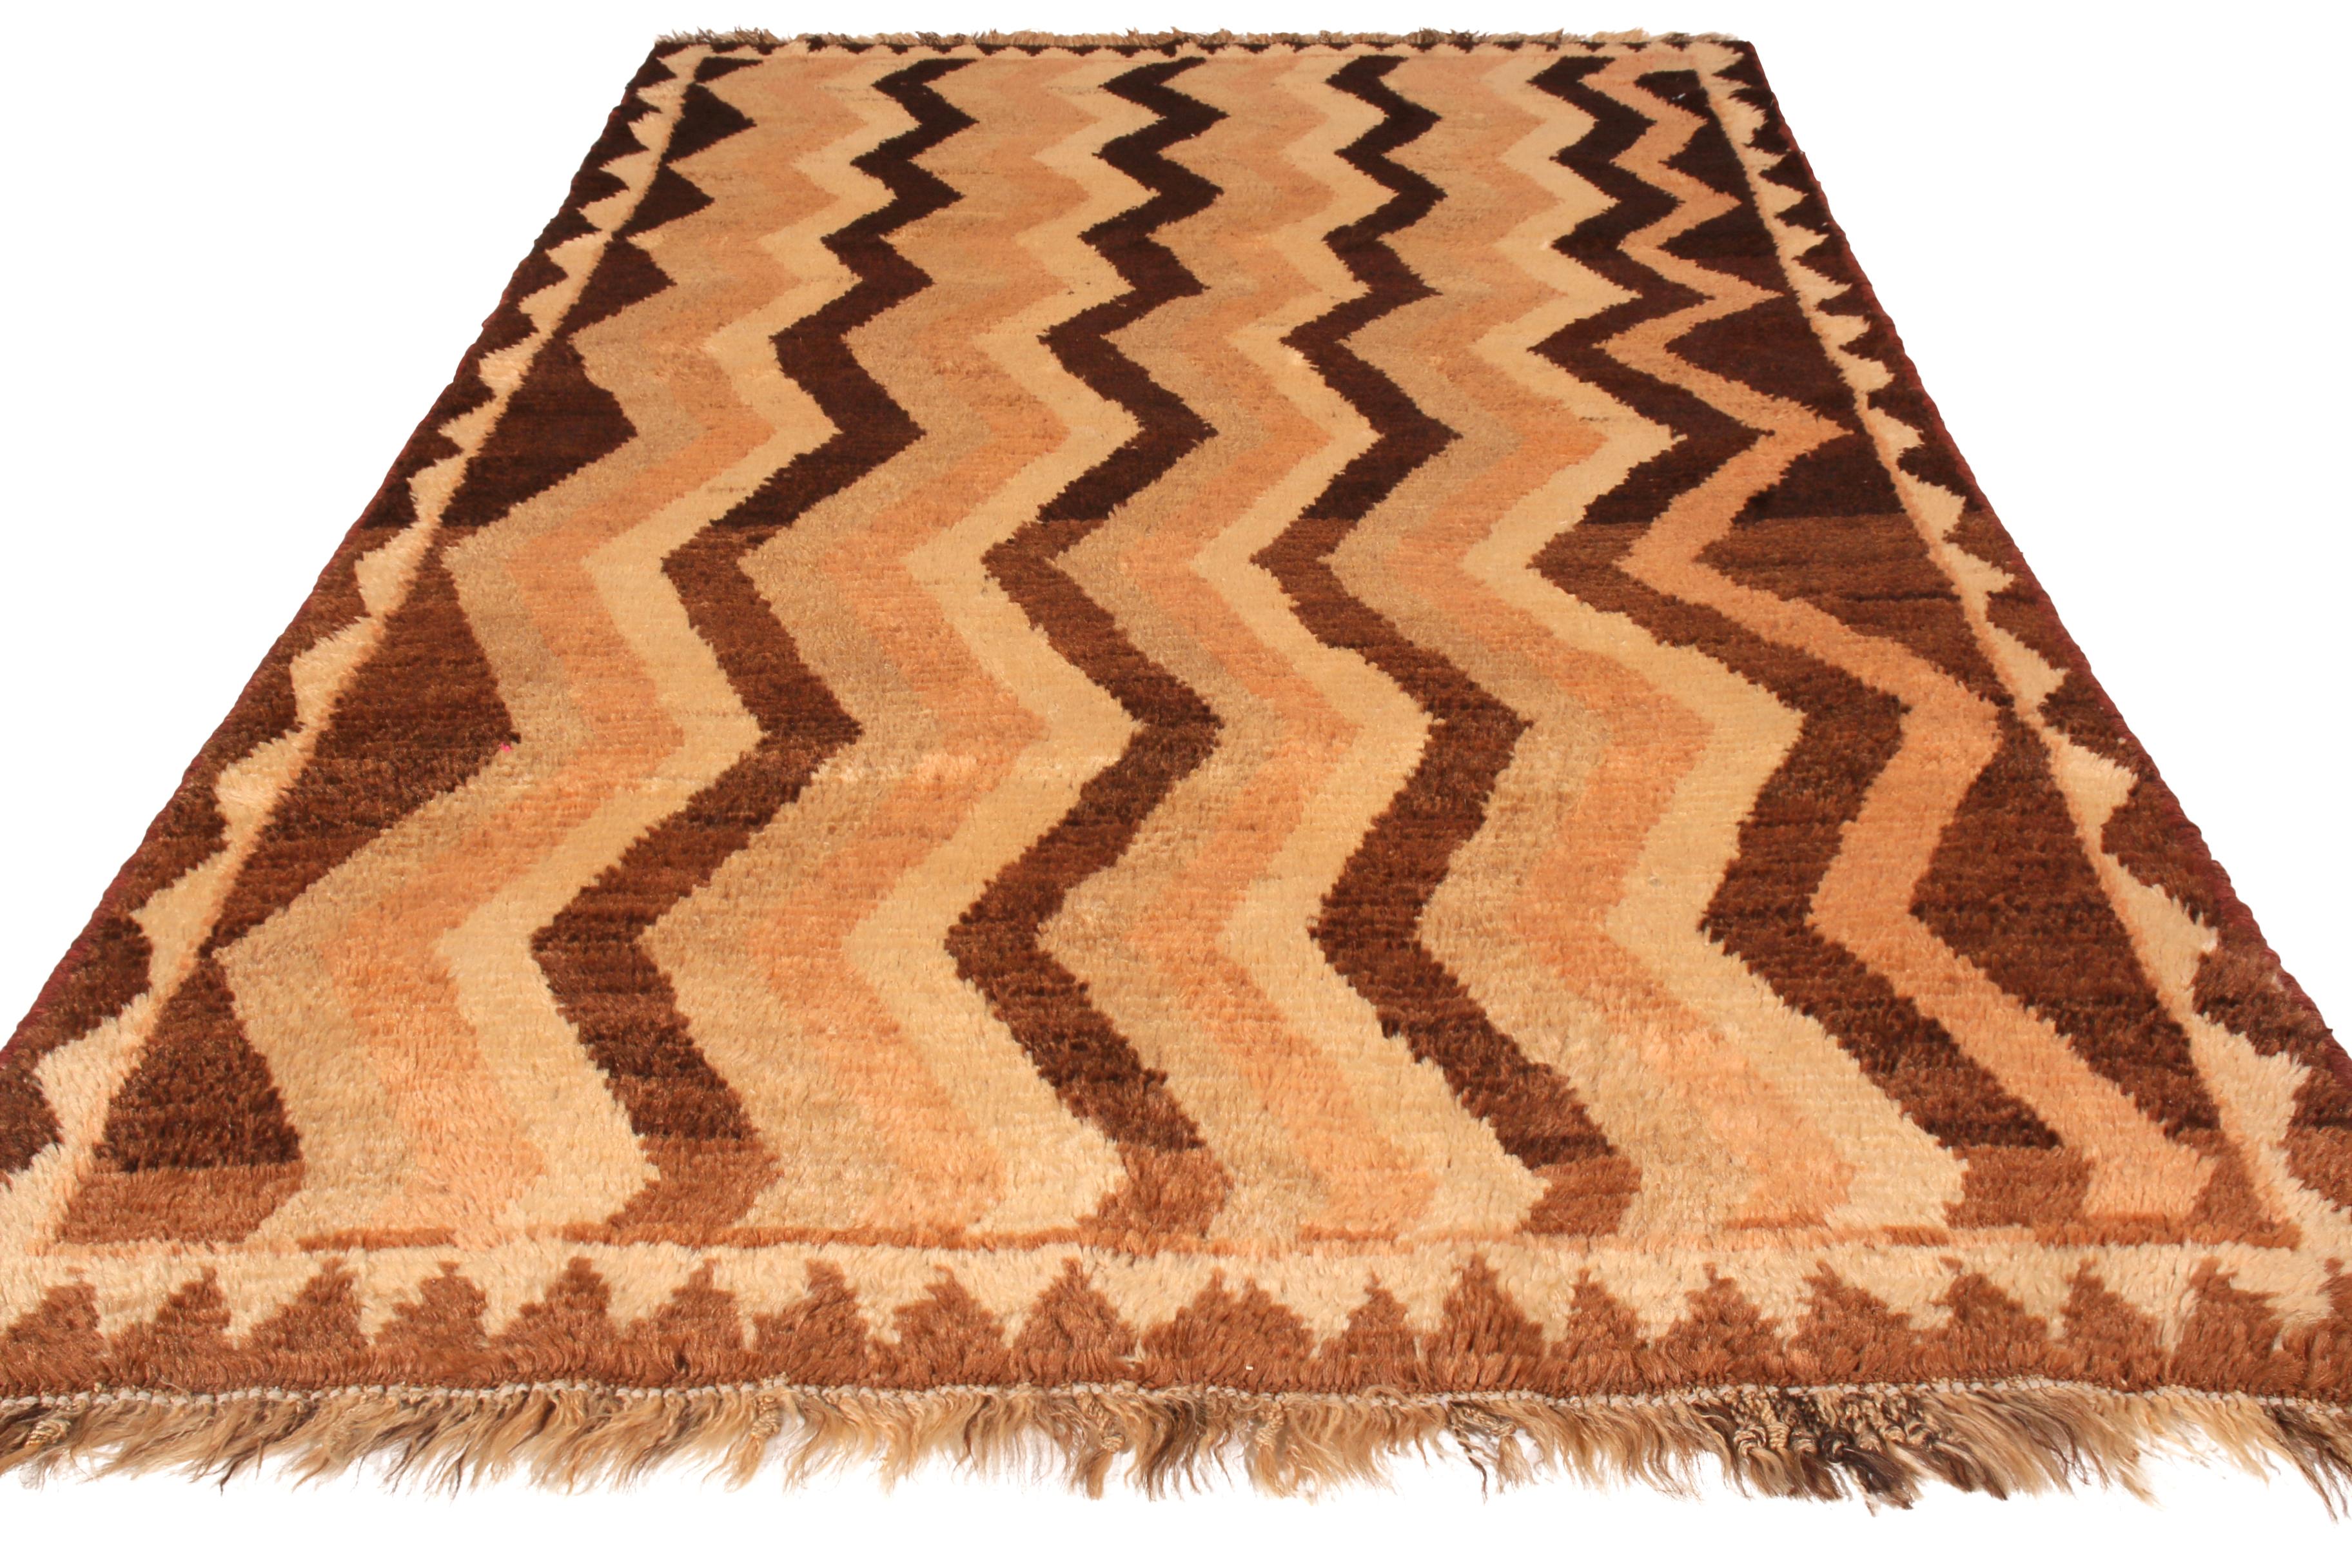 Made with hand knotted wool and originating between 1910-1920, this antique Gabbeh Persian rug recaptures the Classic chevron pattern its lineage is known for in an uncommonly reserved colorway pallet, enjoying warm and rich juxtaposition of beige